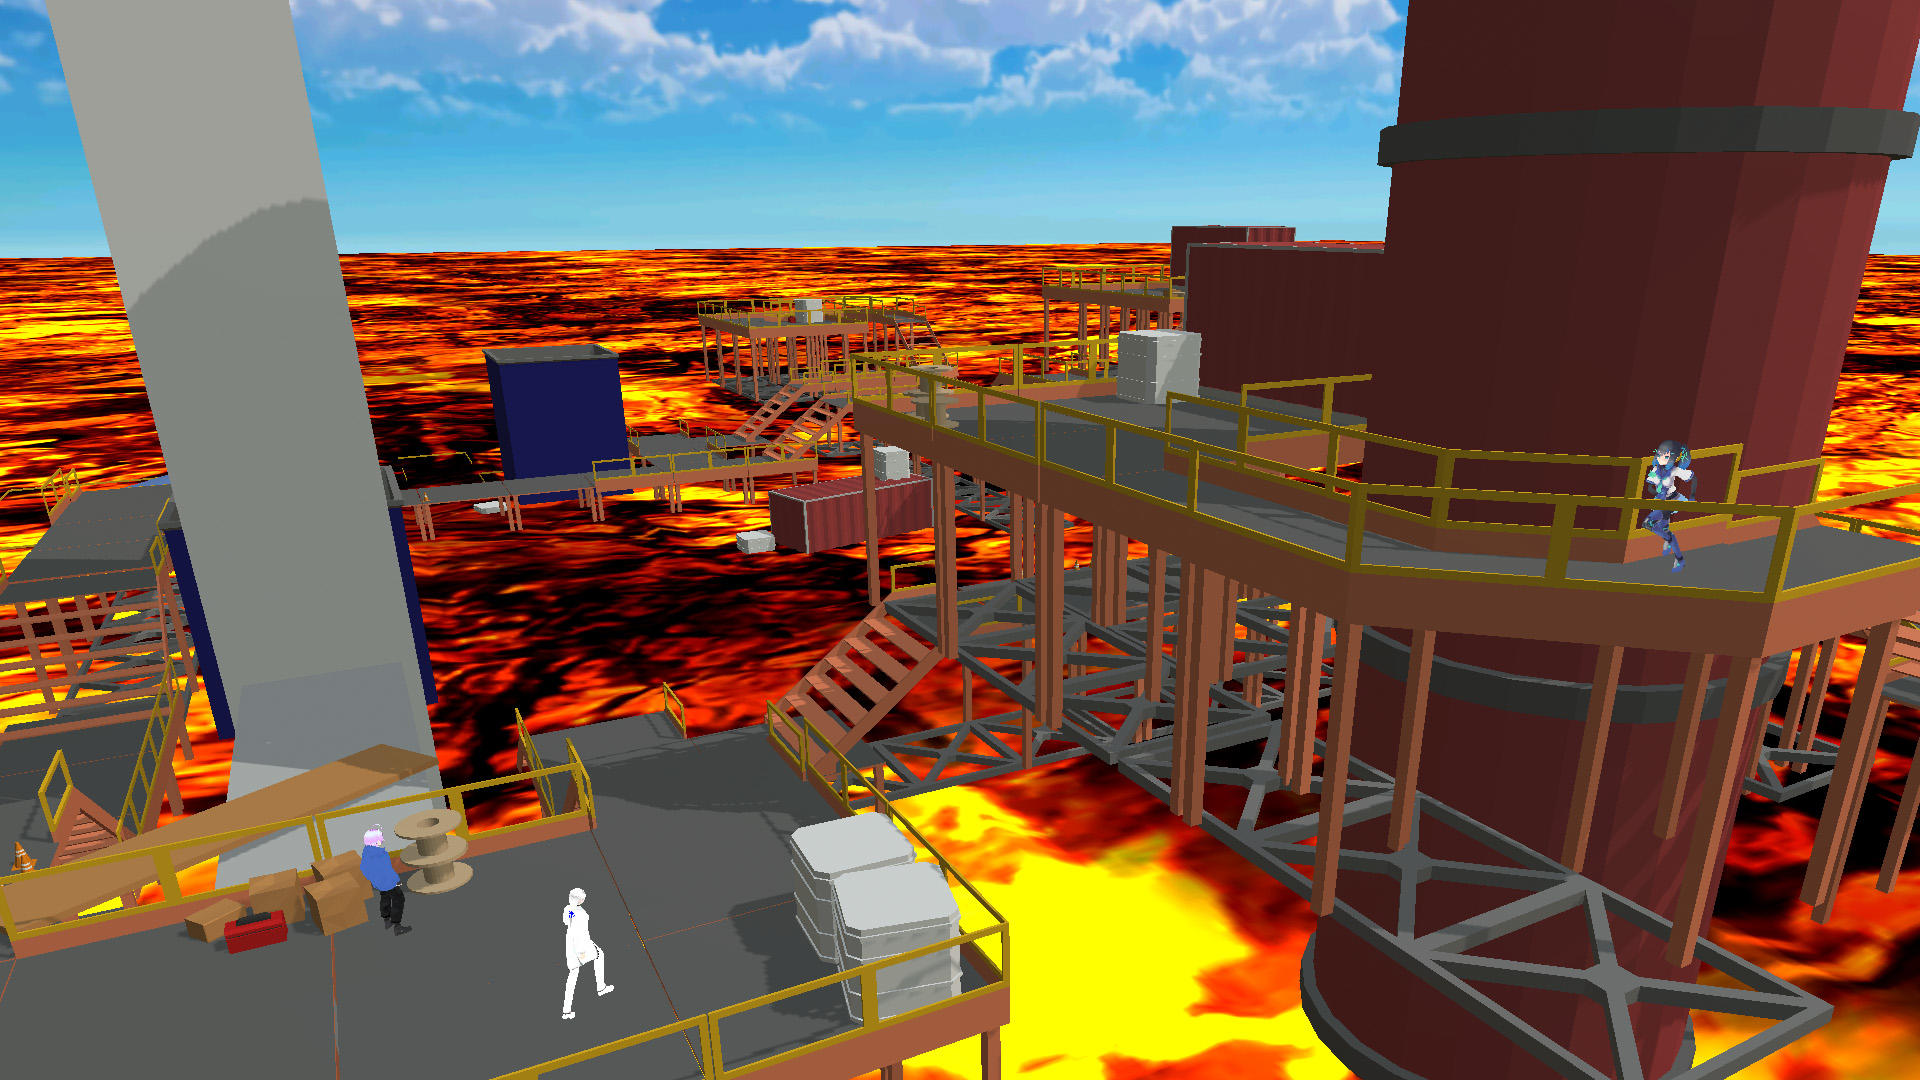 Screenshot of The floor is lava game parkour